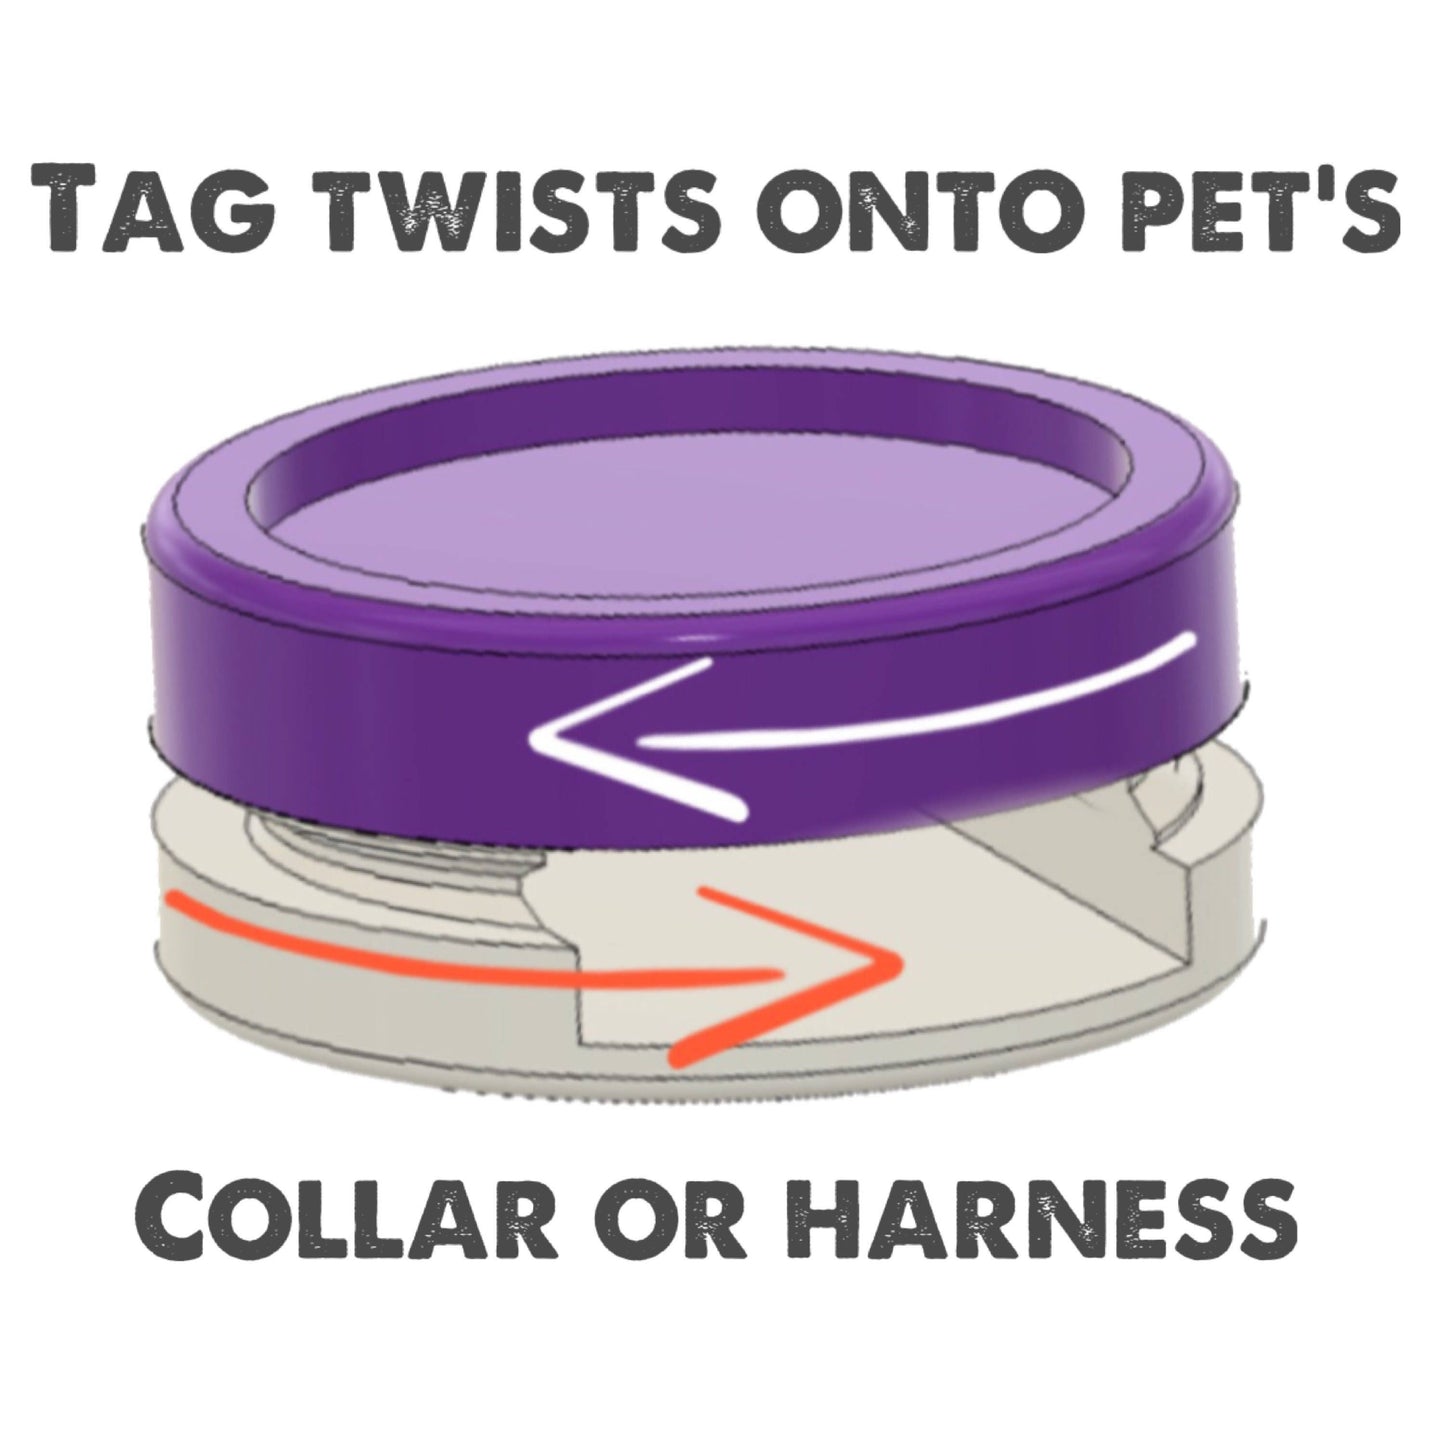 Raw Fed Funny Pet Tag- Silent, Eco-Friendly, Ringless ID Tag for Cats and Dogs